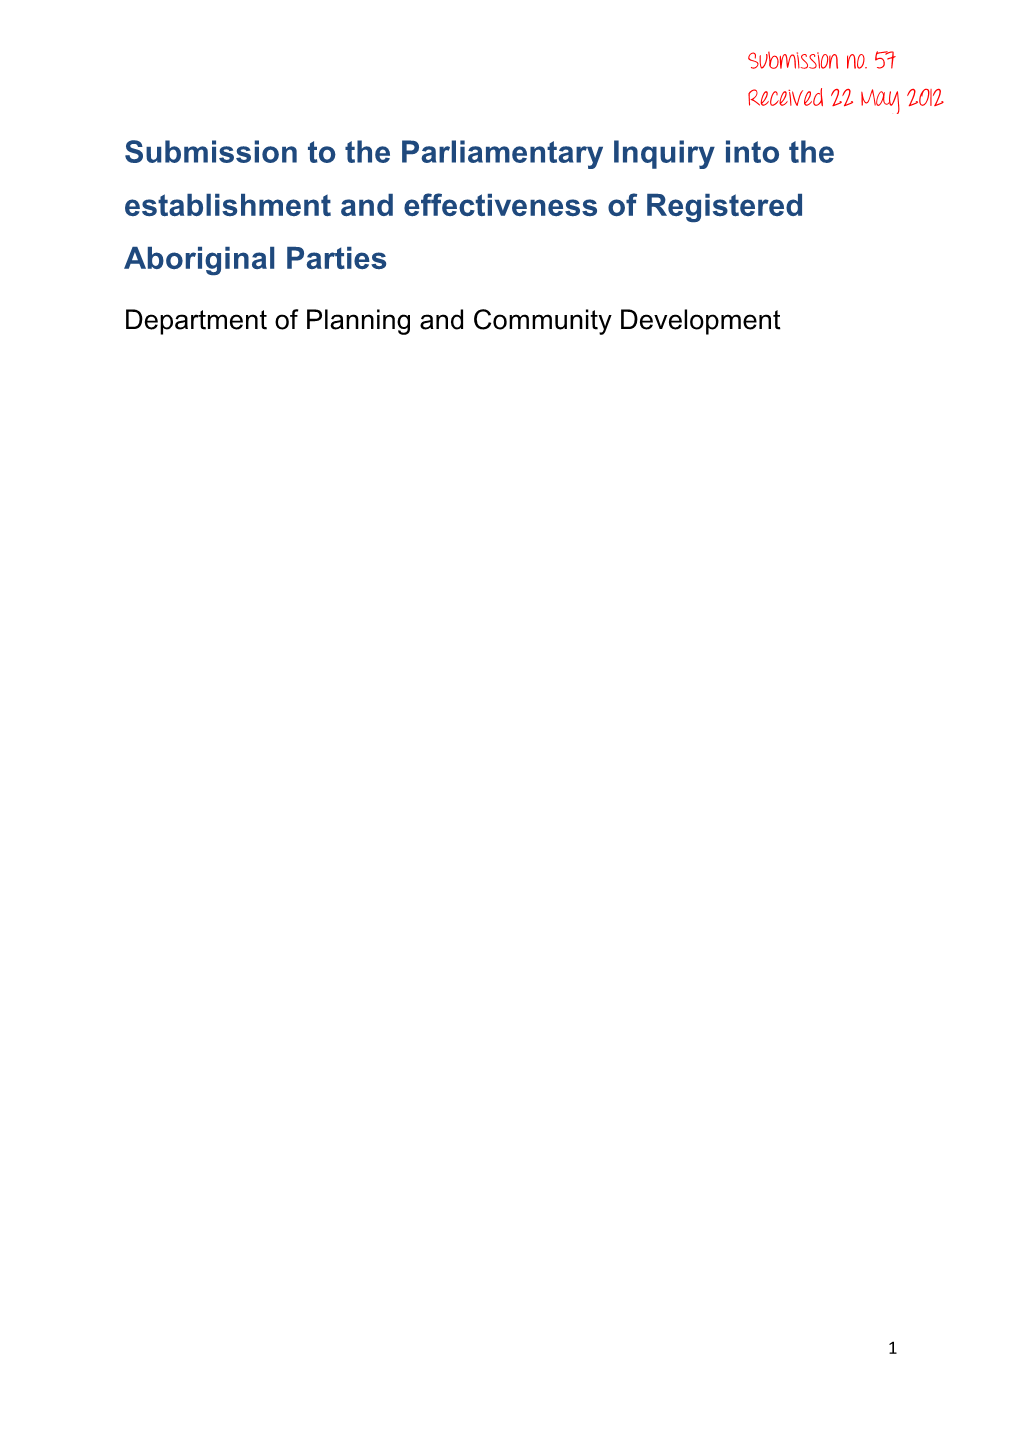 Submission to the Parliamentary Inquiry Into the Establishment and Effectiveness of Registered Aboriginal Parties